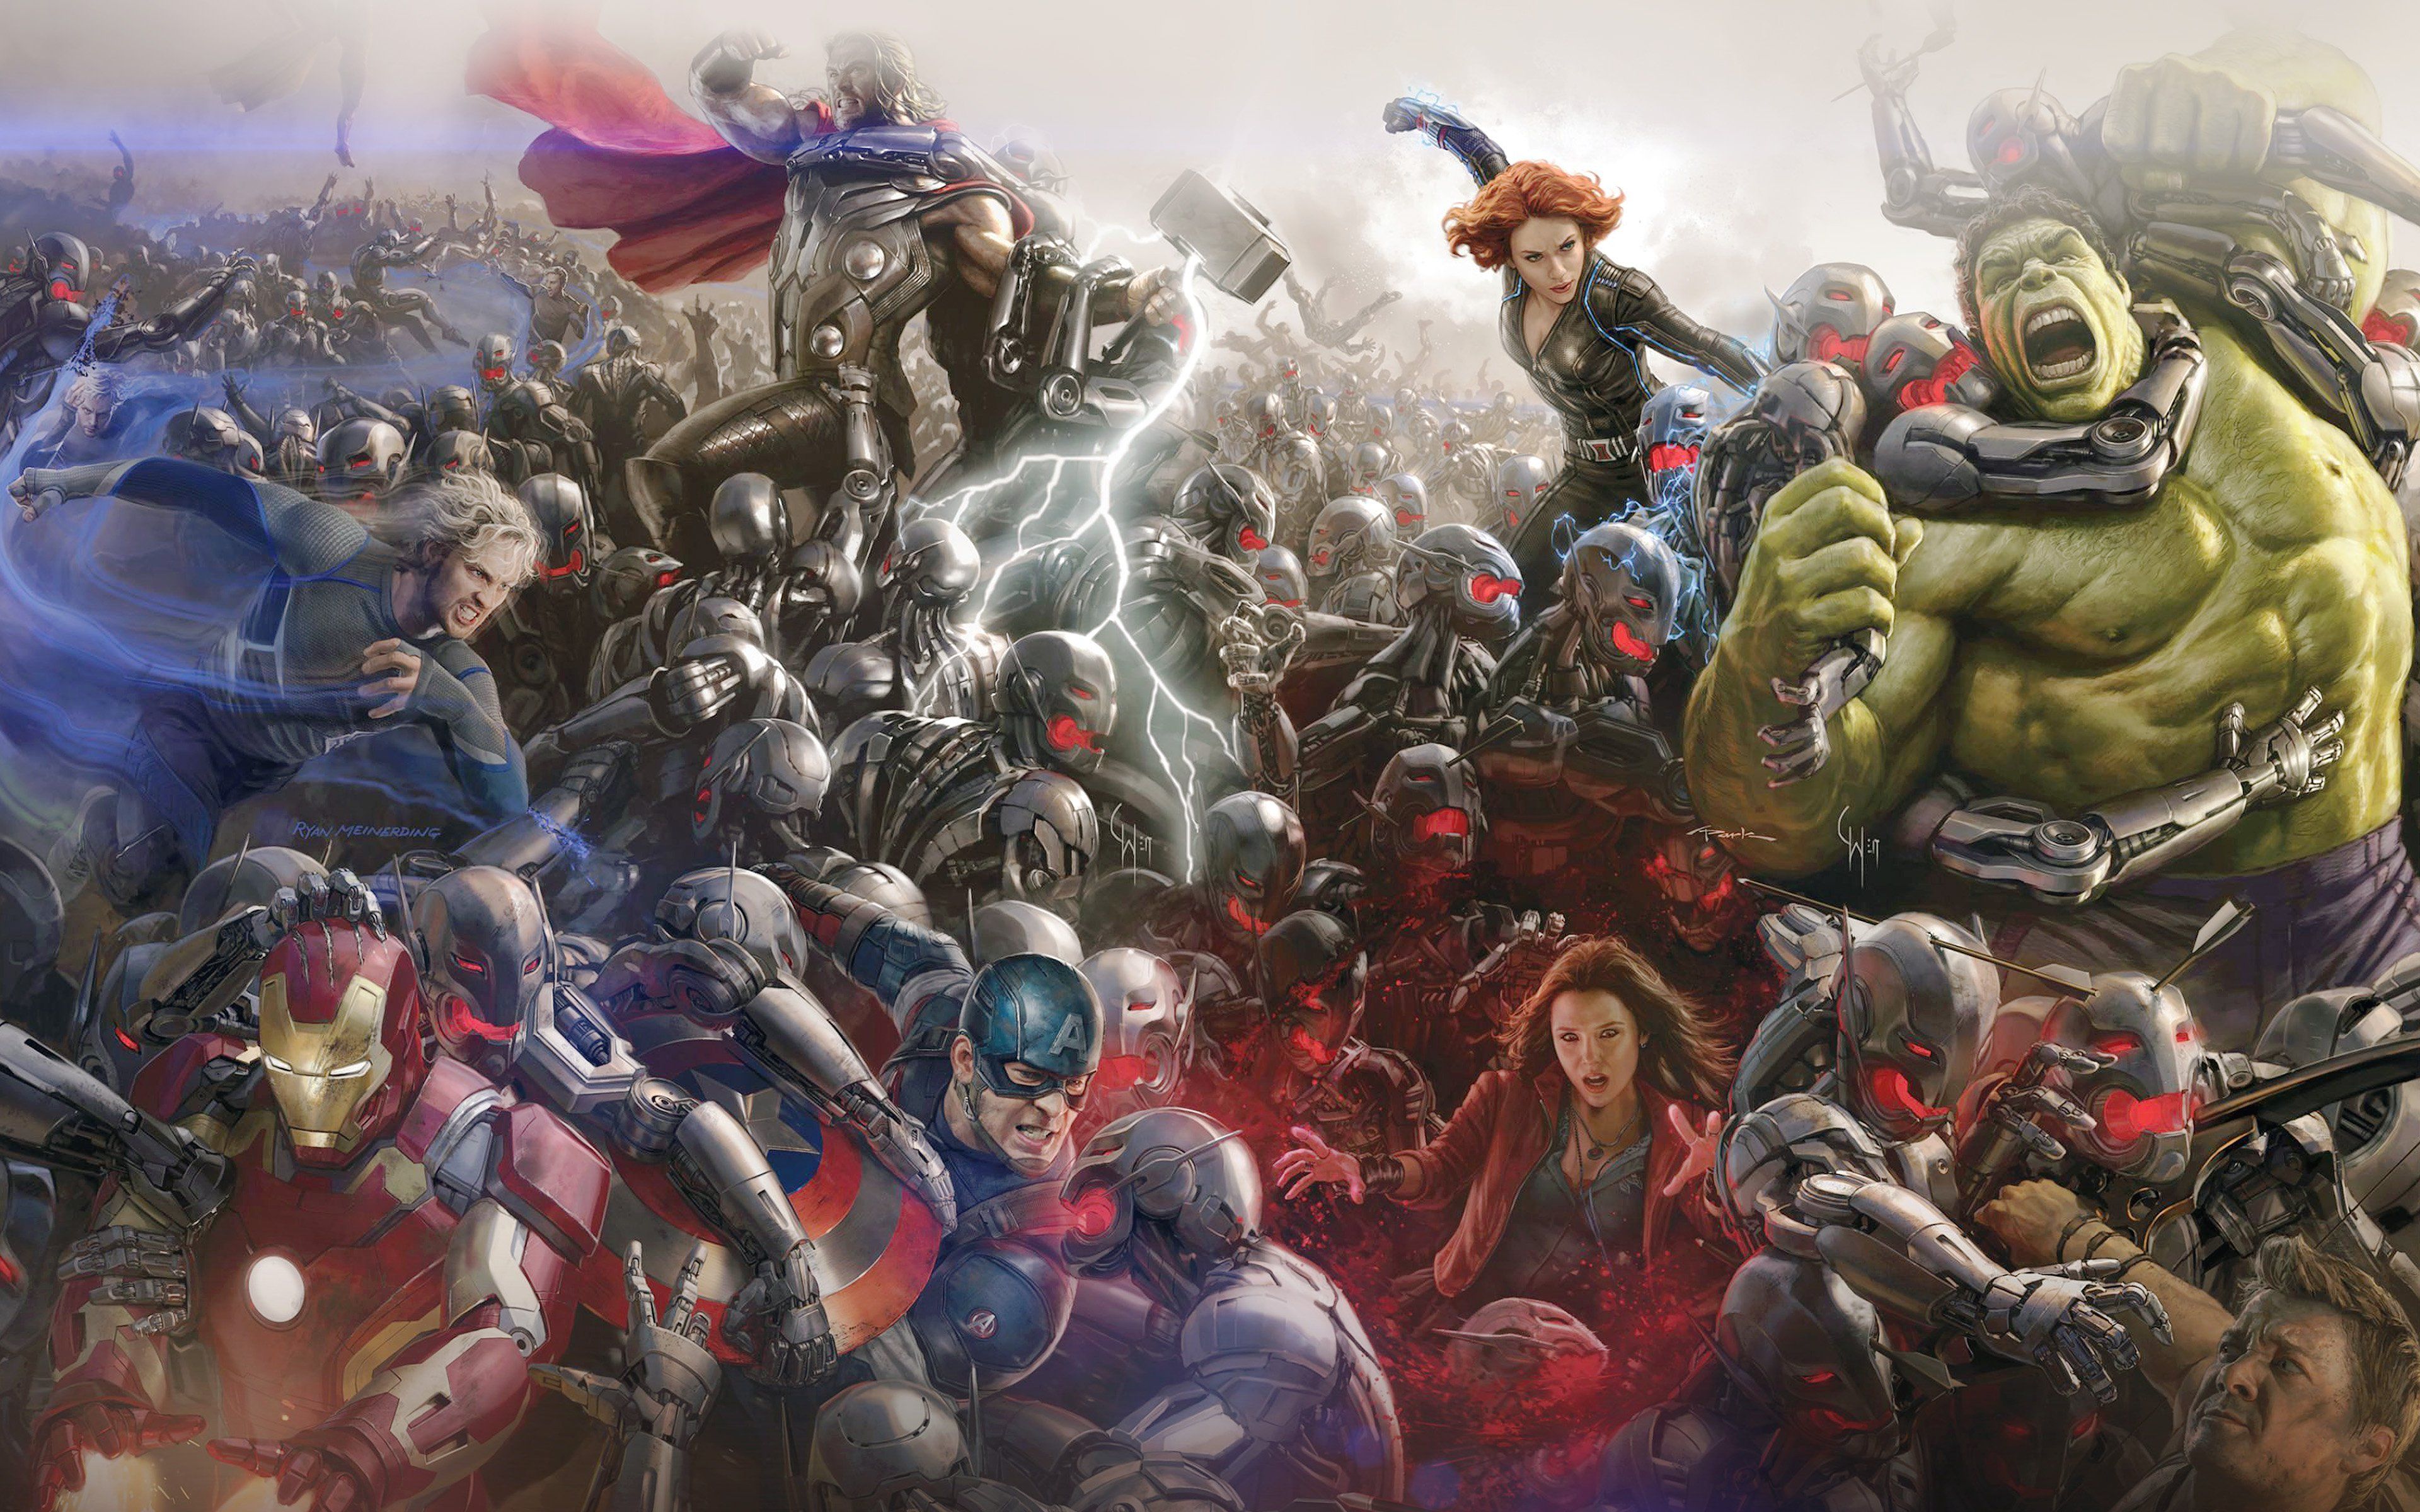 Avengers Age of Ultron 4K UHD Wallpaper. HD Wallpaper, HD Background, Tumblr Background, Image, Picture